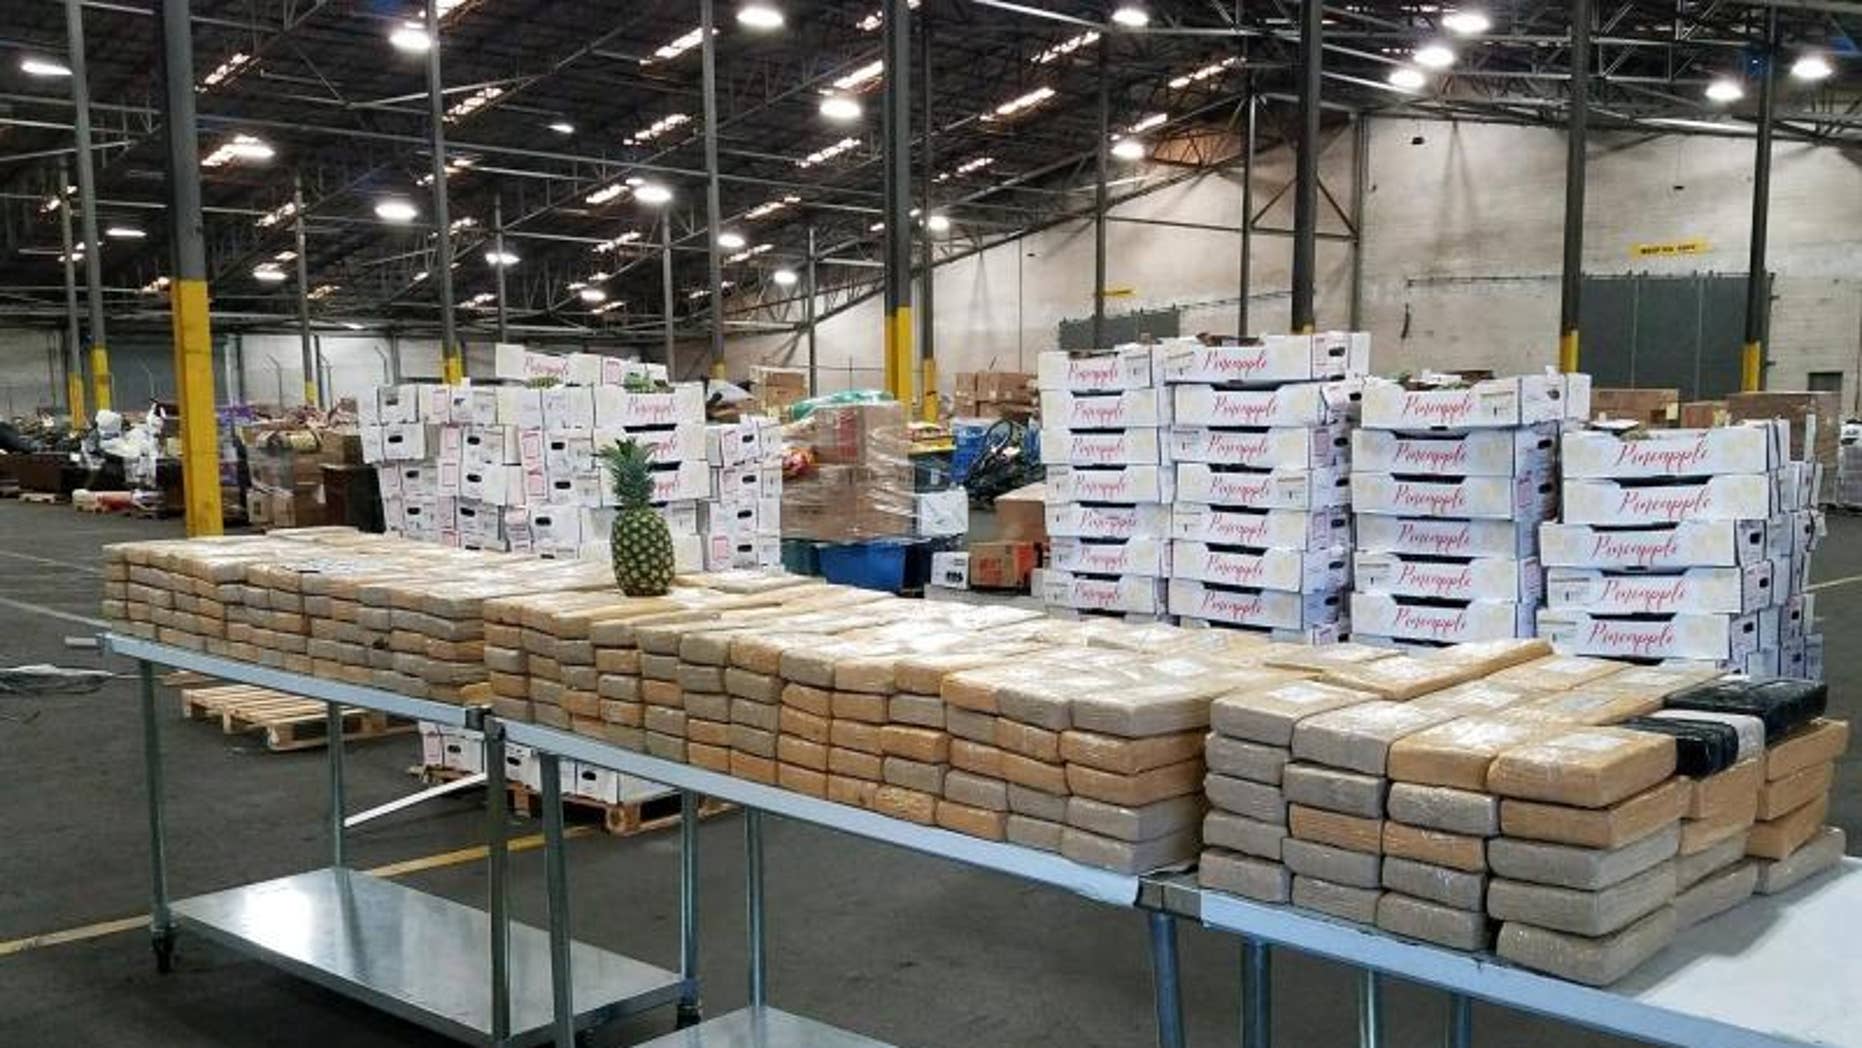 The Customs and Border Protection Service announced Friday that cocaine, valued at more than $ 19 million, had been seized after being discovered in a cargo of pineapple.